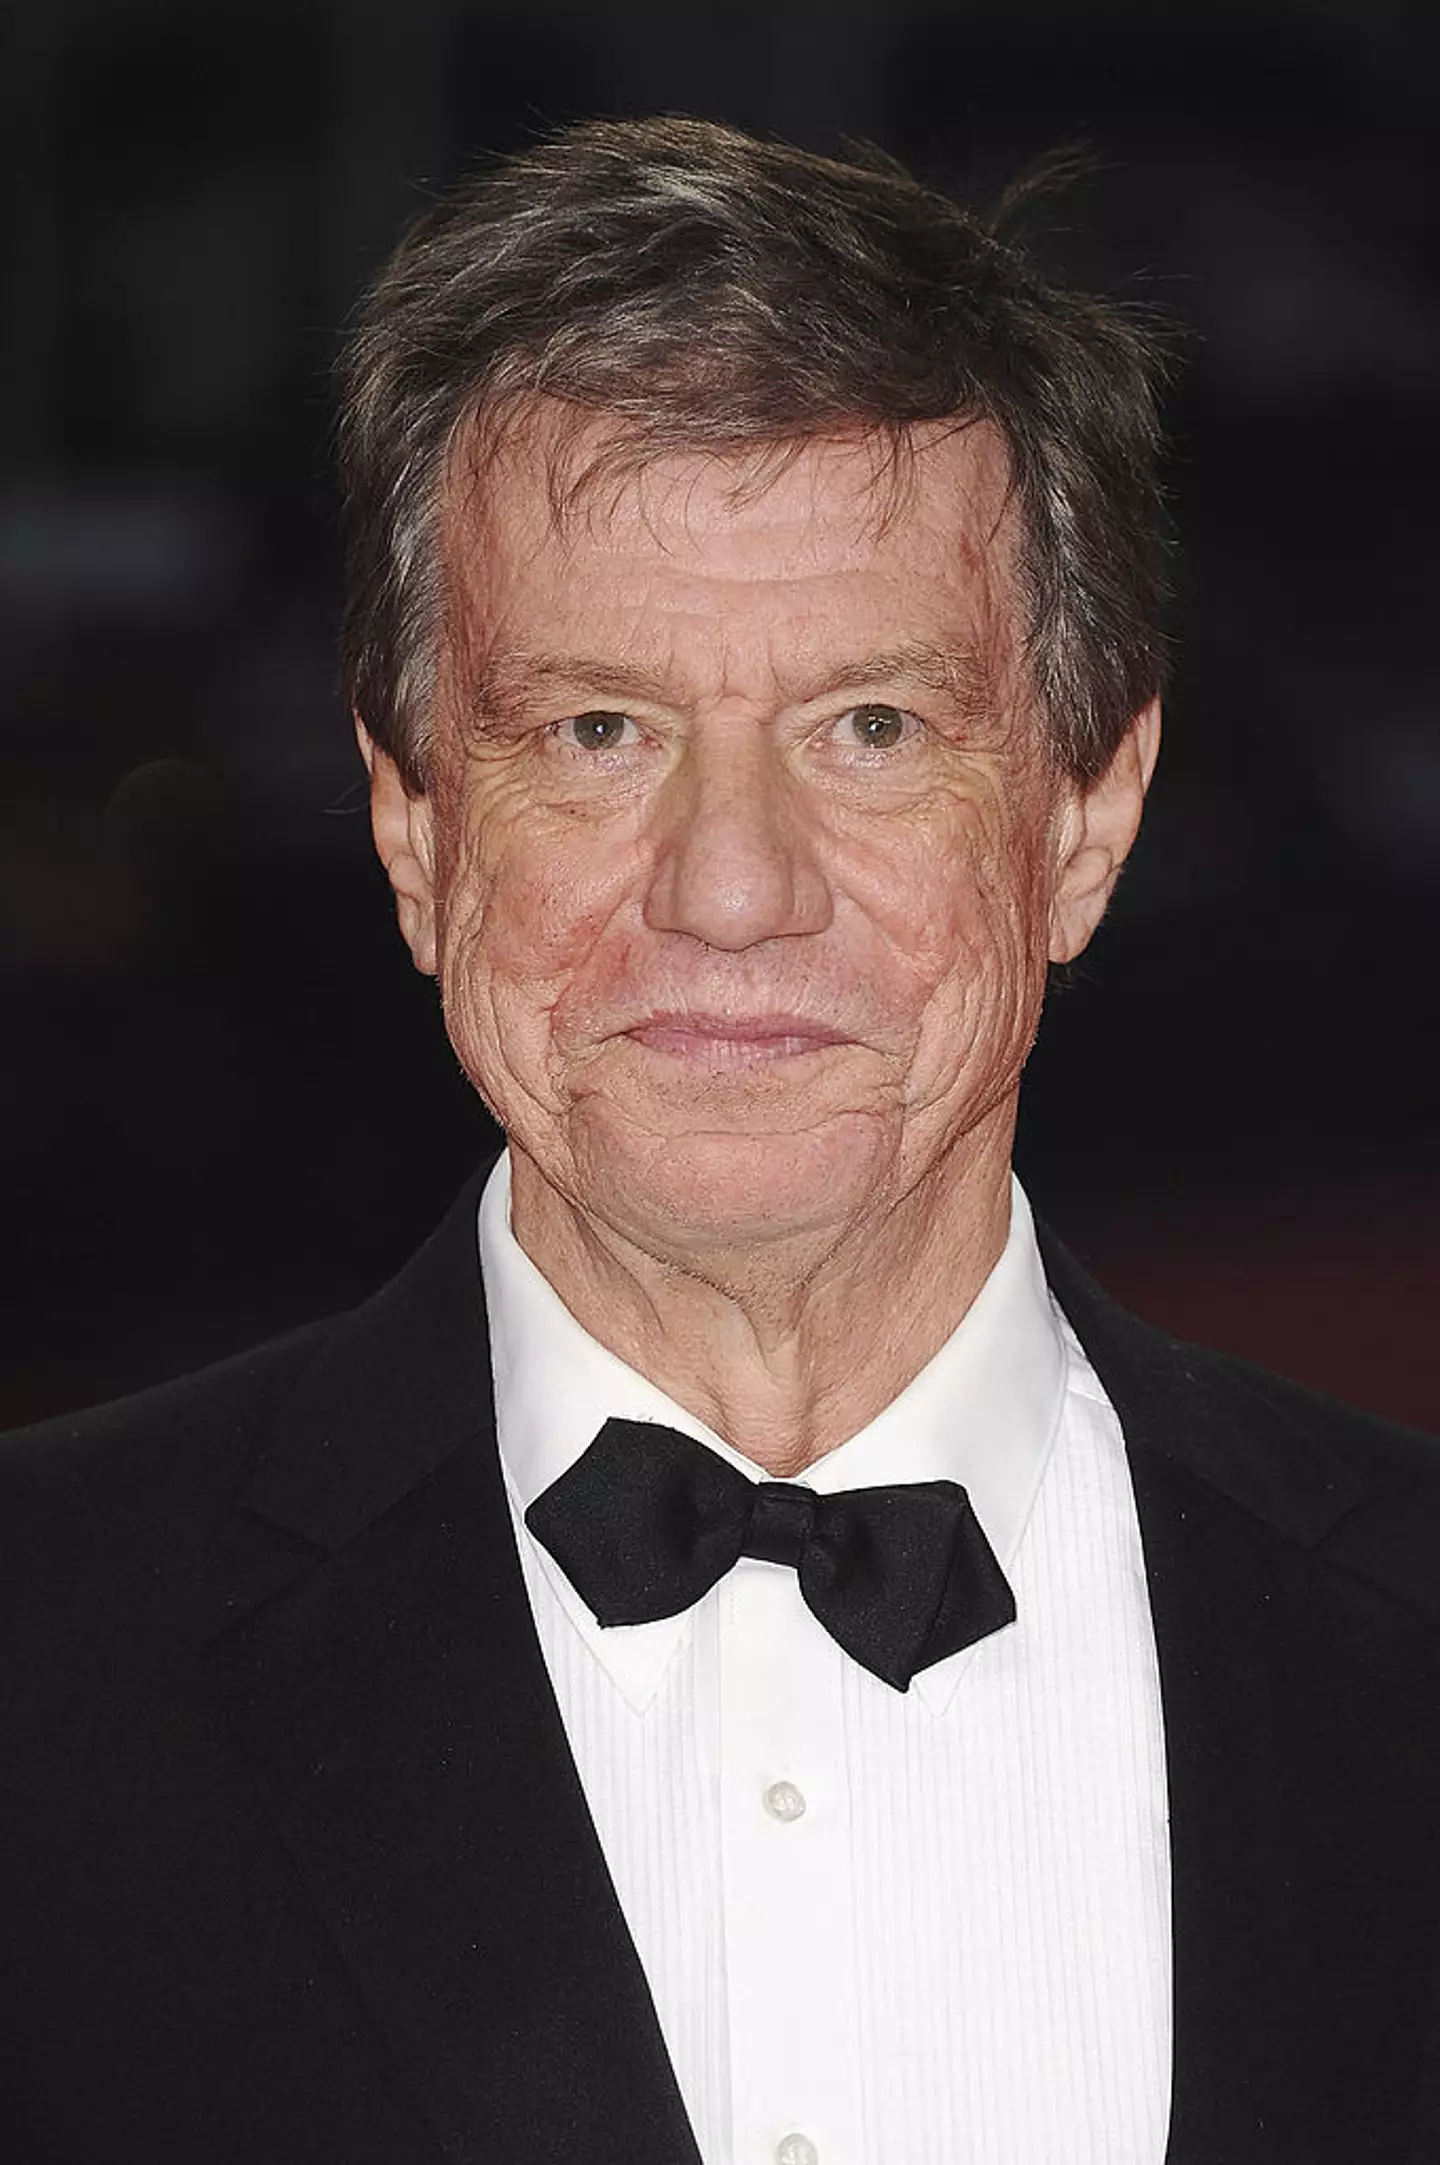 John McTiernan has given his ruling on Die Hard's festive credentials.